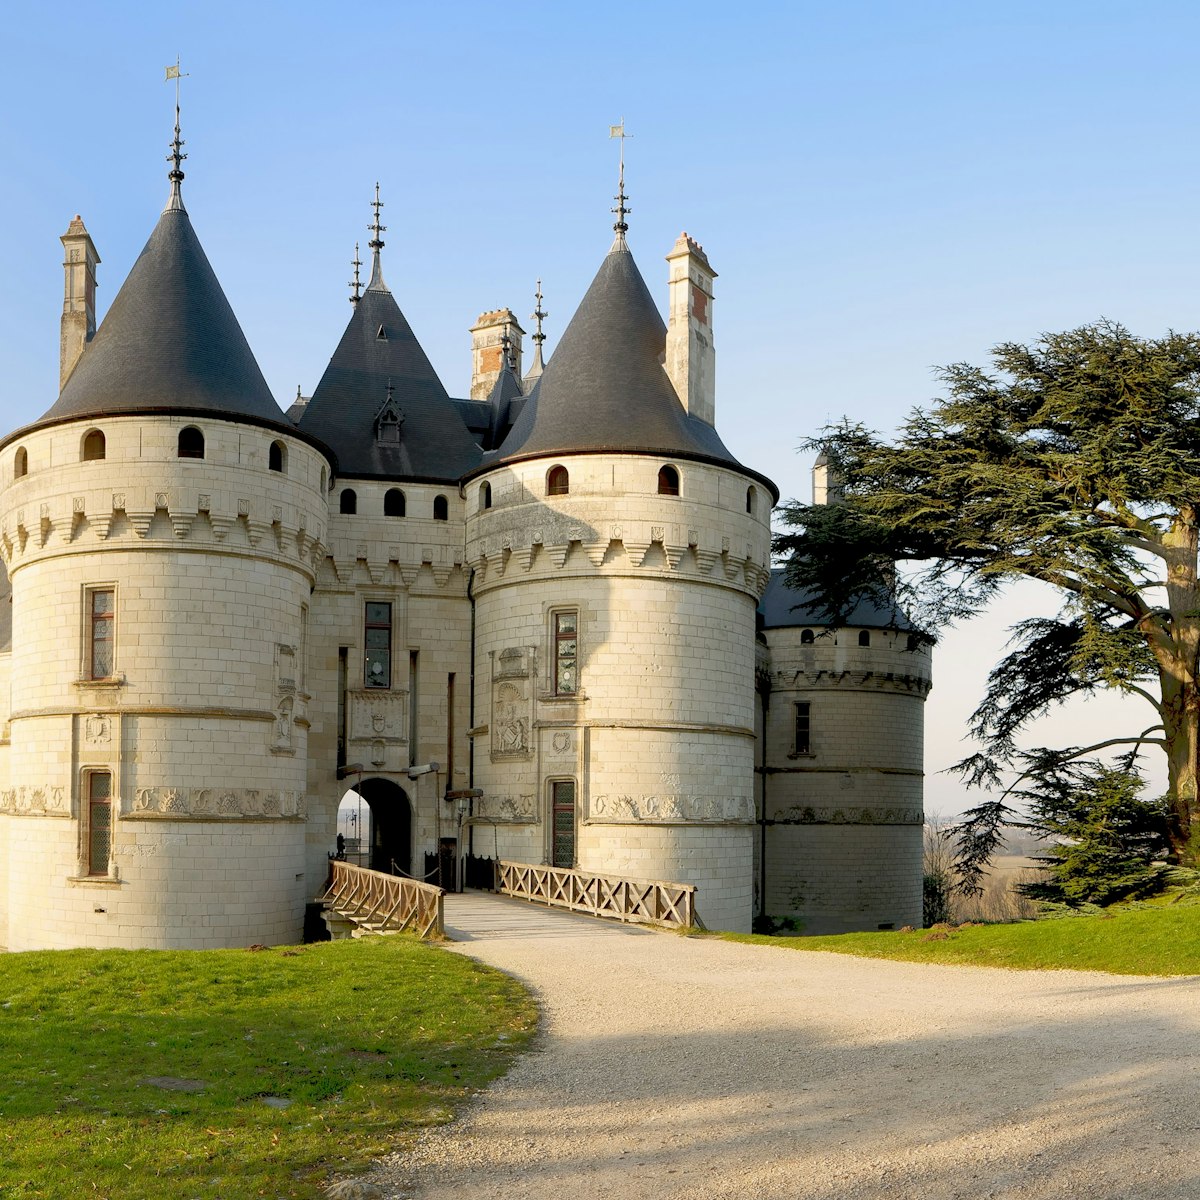 Chaumont Castle in Loire Valley France - Panoramic wide view to the entrance and the garden at sunrise with trees, grass under blue sky;,,Château de Chaumont-sur-Loire,,Shutterstock ID 1467775043; your: Bridget Brown; gl: 65050; netsuite: Online Editorial; full: POI Image Update